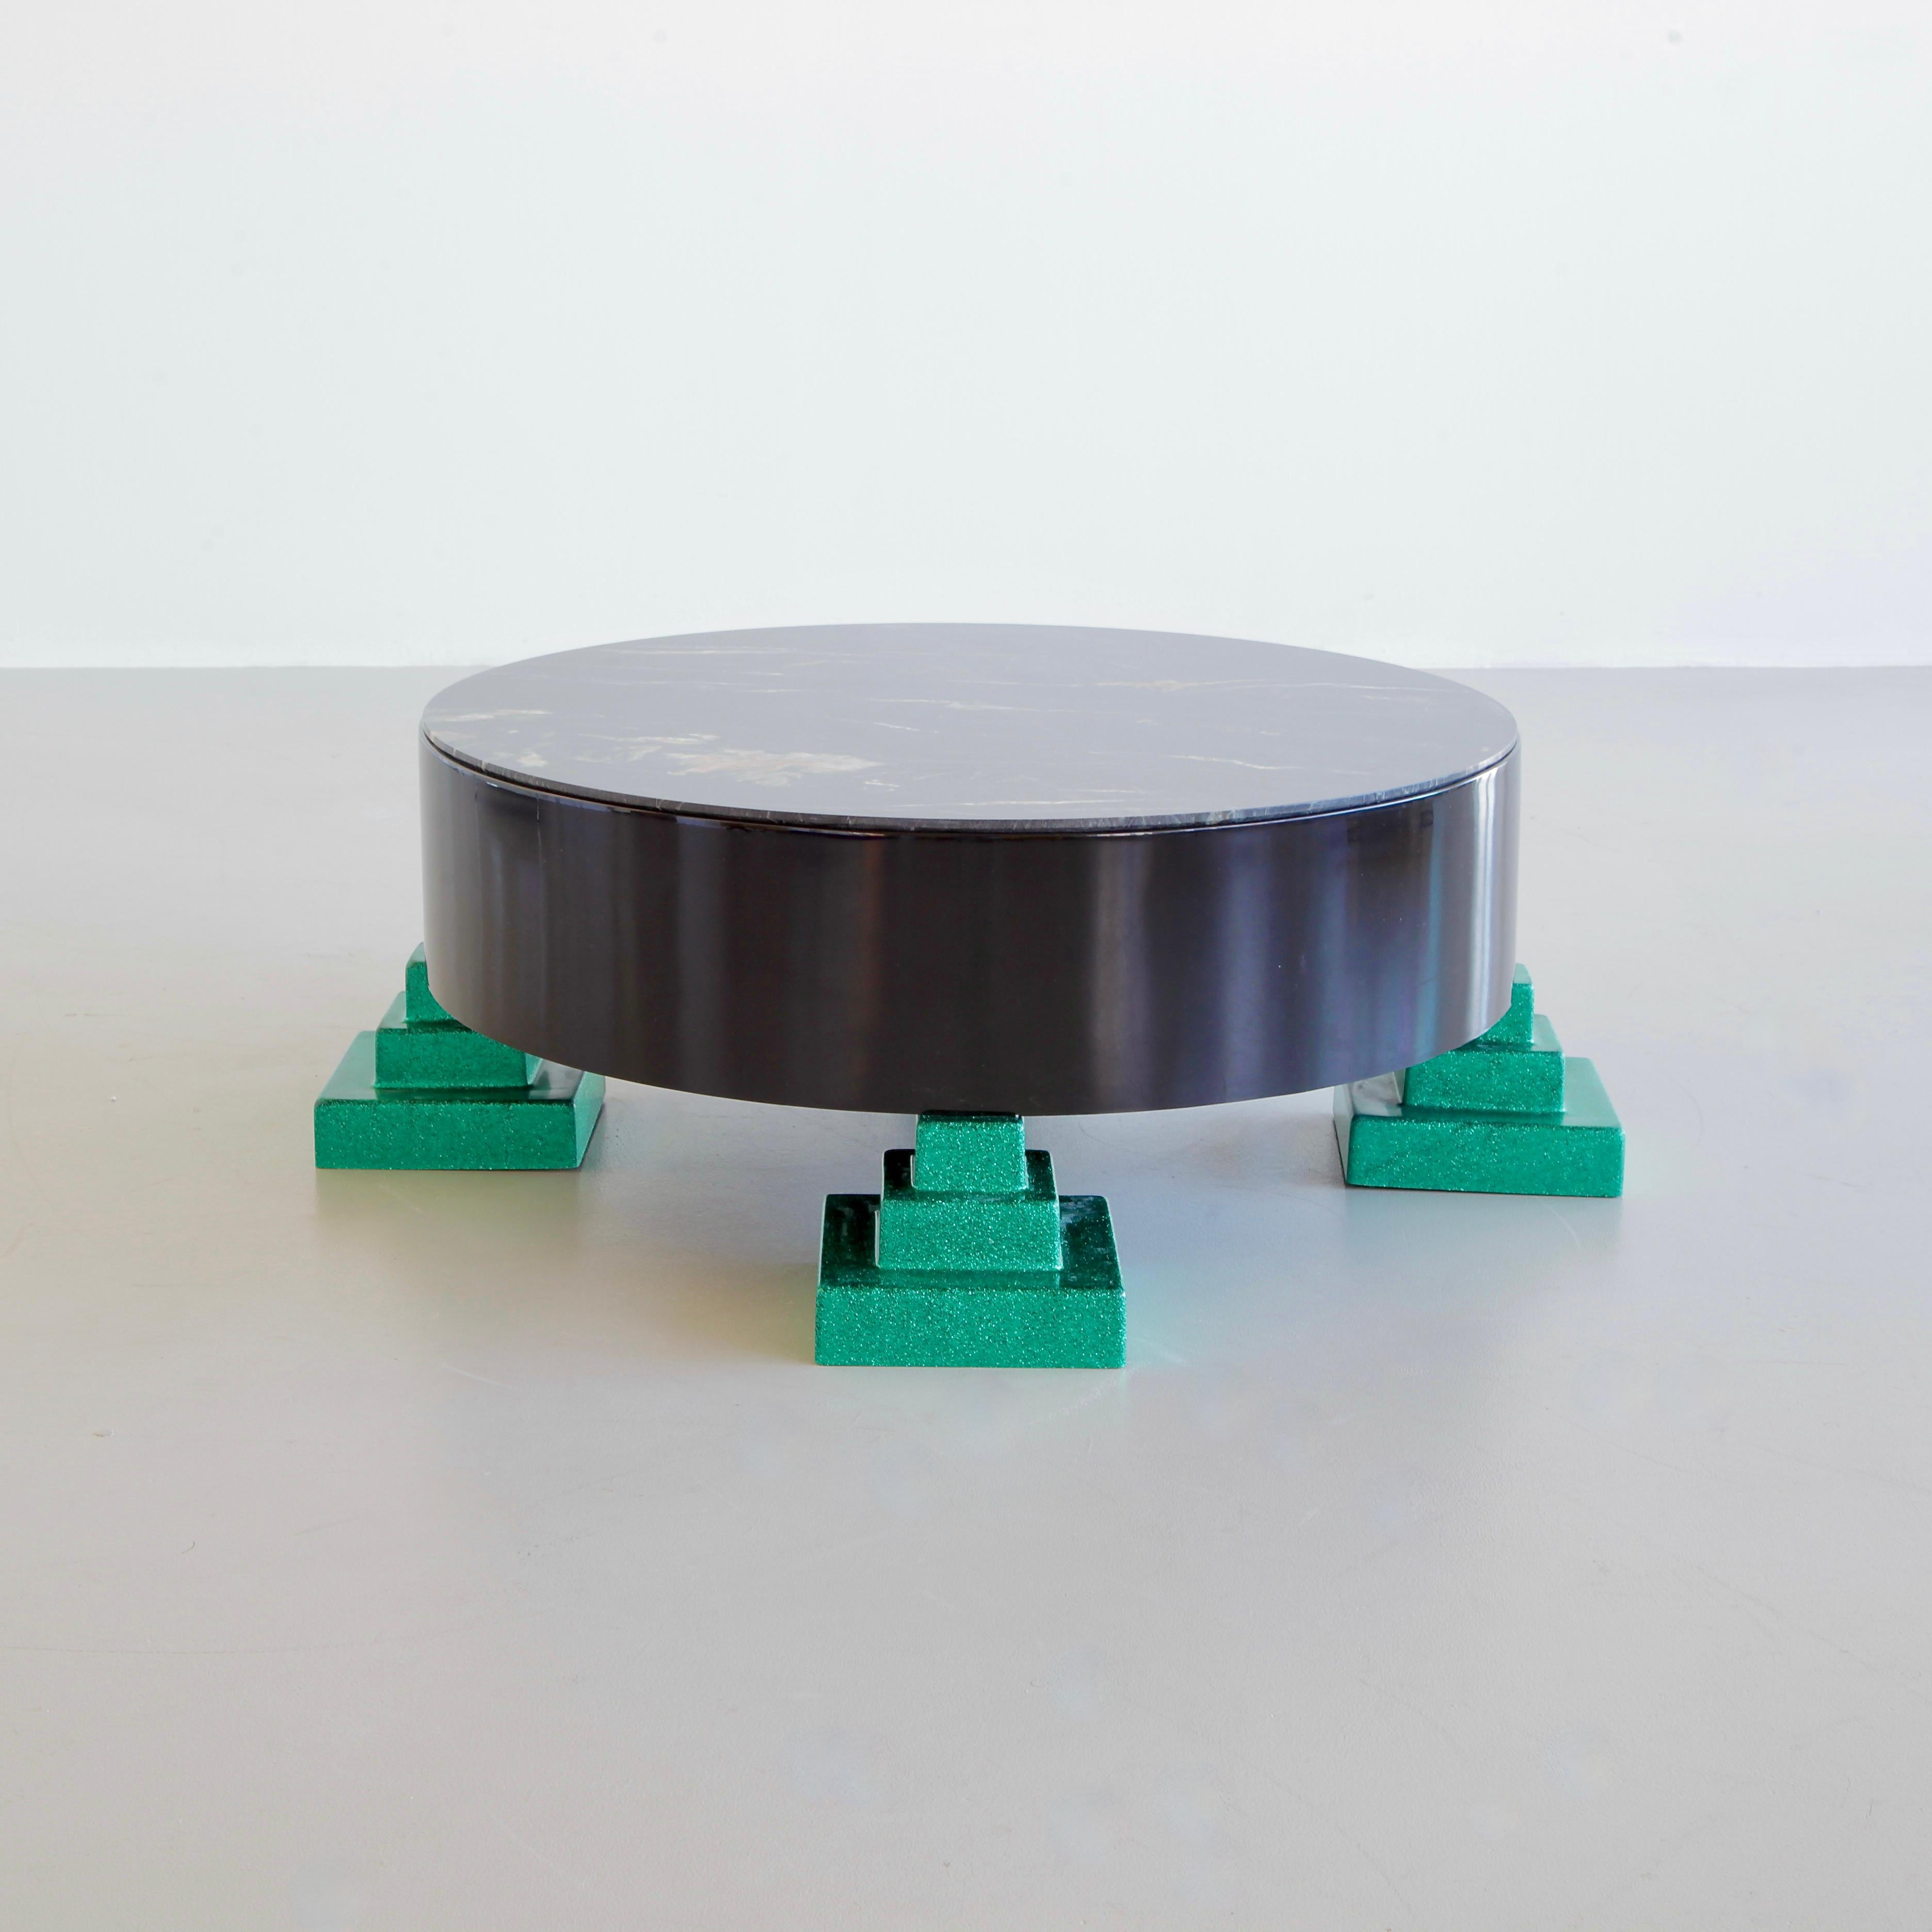 Coffee table 'PARK LANE', designed by Ettore Sottsass in 1983, Italy.

Fibreglass construction in black and green with a black and white veined marble top.

Ettore Sottsass (14 September 1917 – 31 December 2007). Italian architect and designer